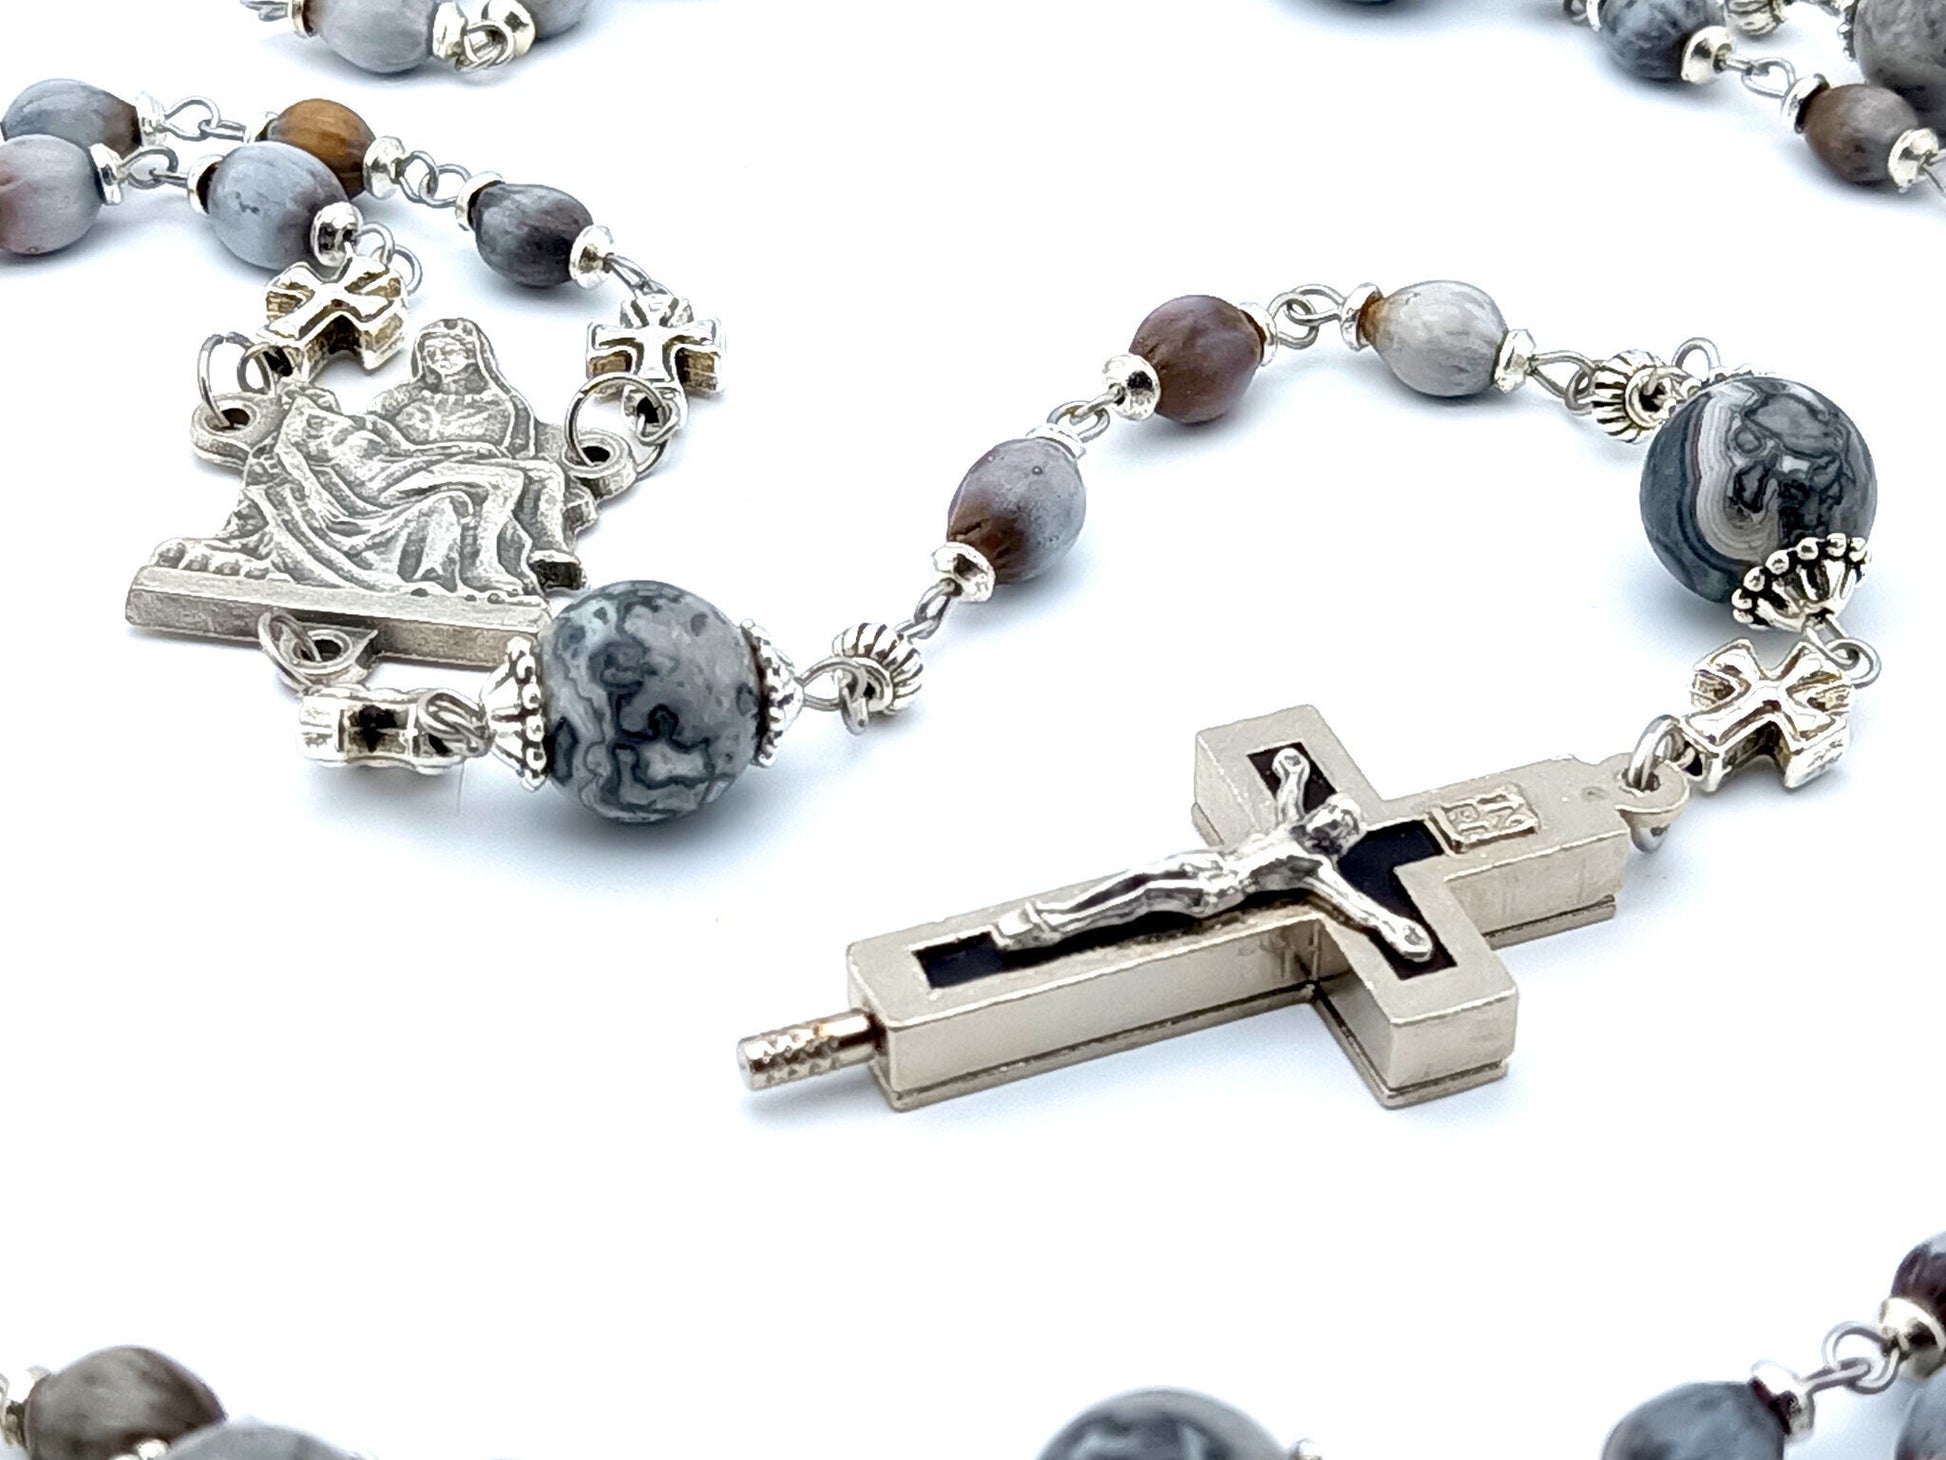 La Pieta unique rosary beads with Jobs Tears beads, agate gemstone pater beads, silver centre medal and relic crucifix.